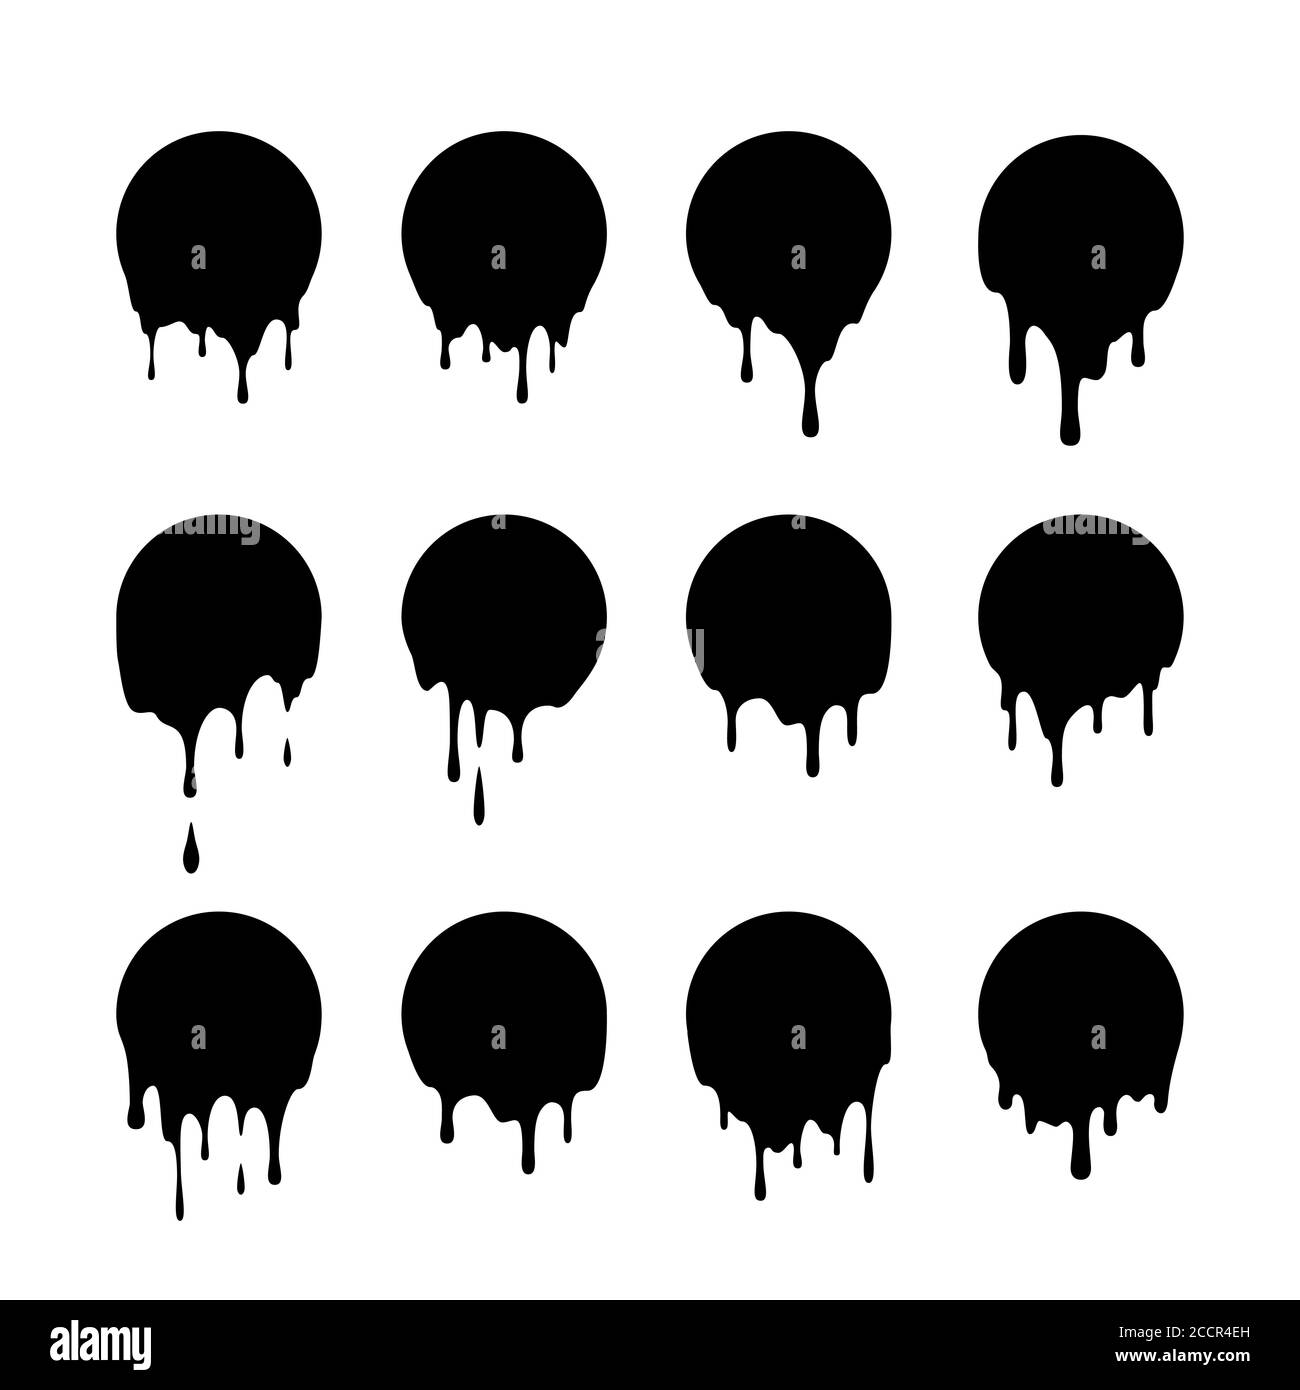 Set of dripping black circles. Dripping liquid. Liquid drops of ink. Vector illustration isolated on white Stock Vector